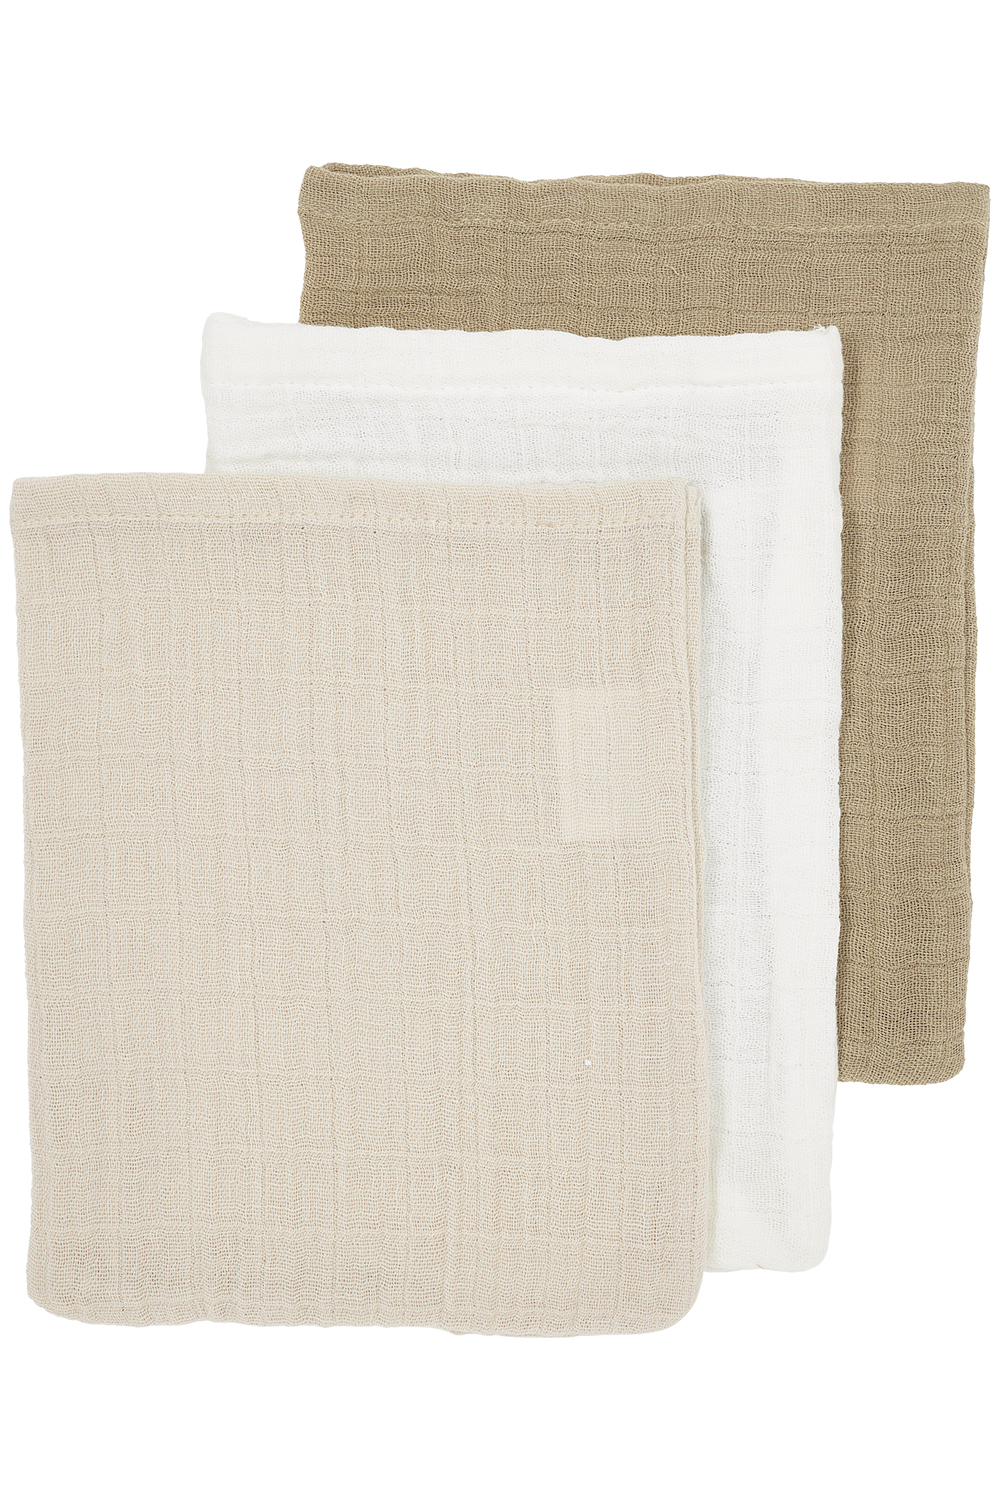 Washcloth 3-pack pre-washed muslin Uni - offwhite/soft sand/taupe - 20x17cm